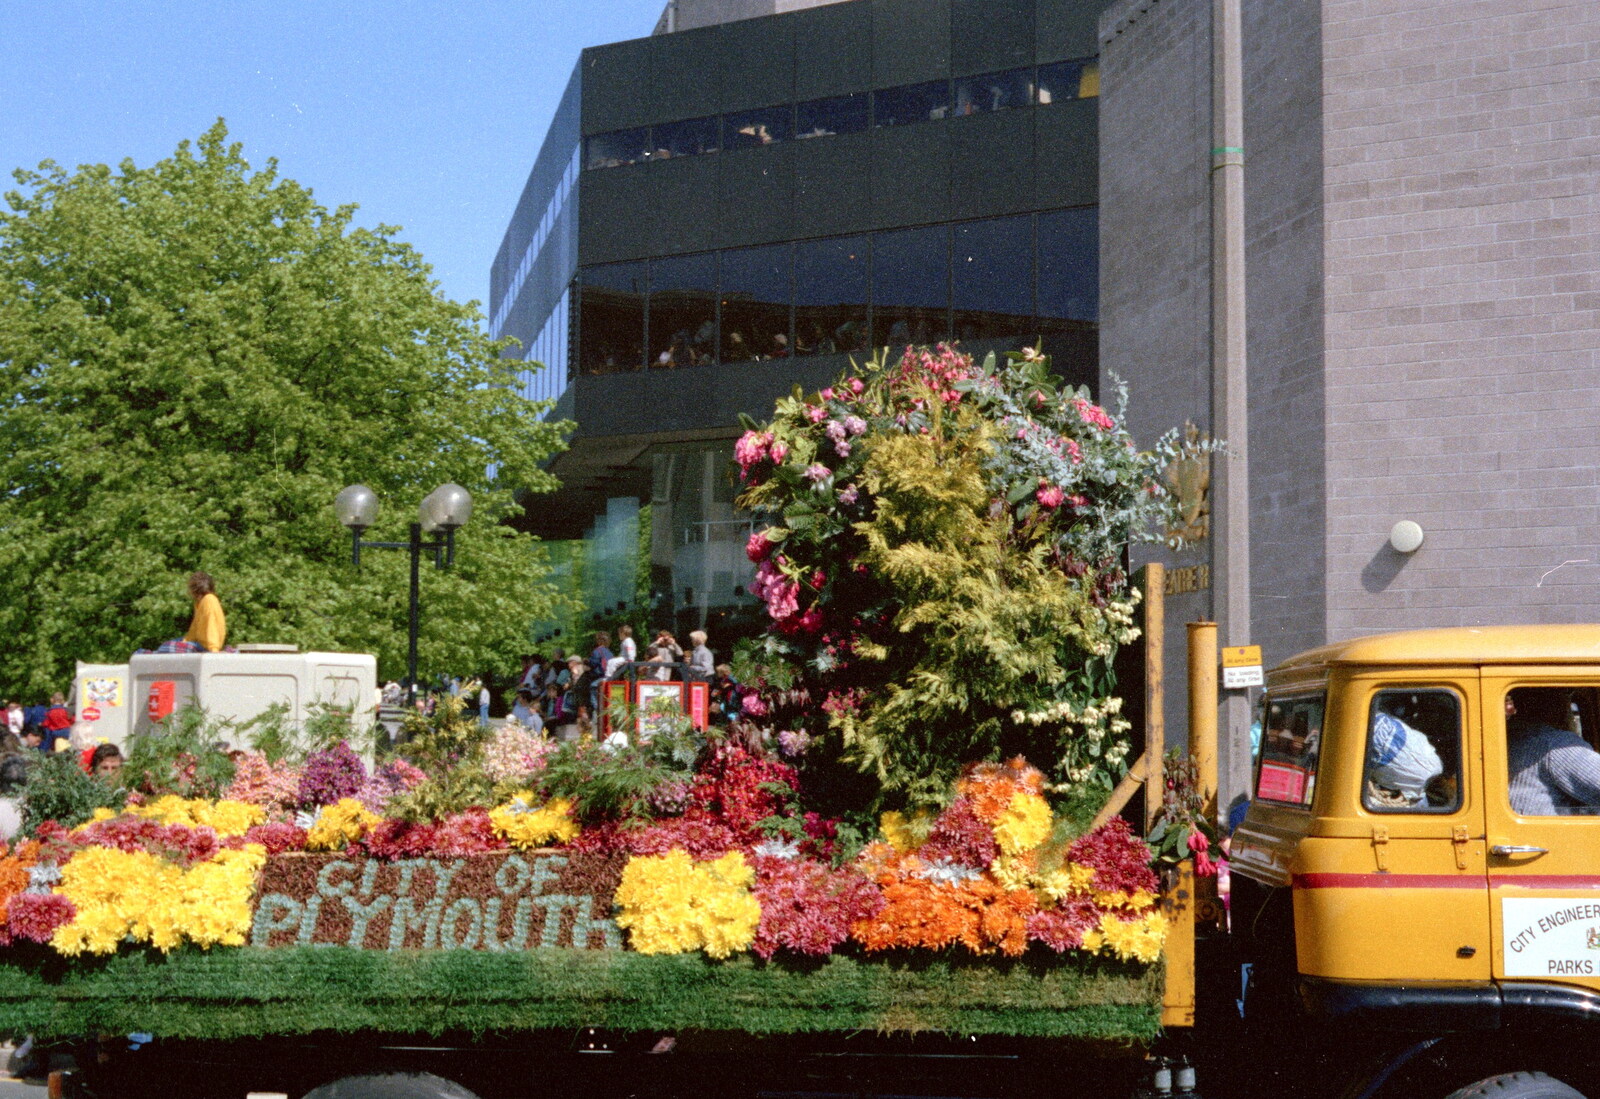 A 'City of Plymouth' float by the Theatre Royal from Uni: The Lord Mayor's Procession, Plymouth, Devon - 21st May 1986